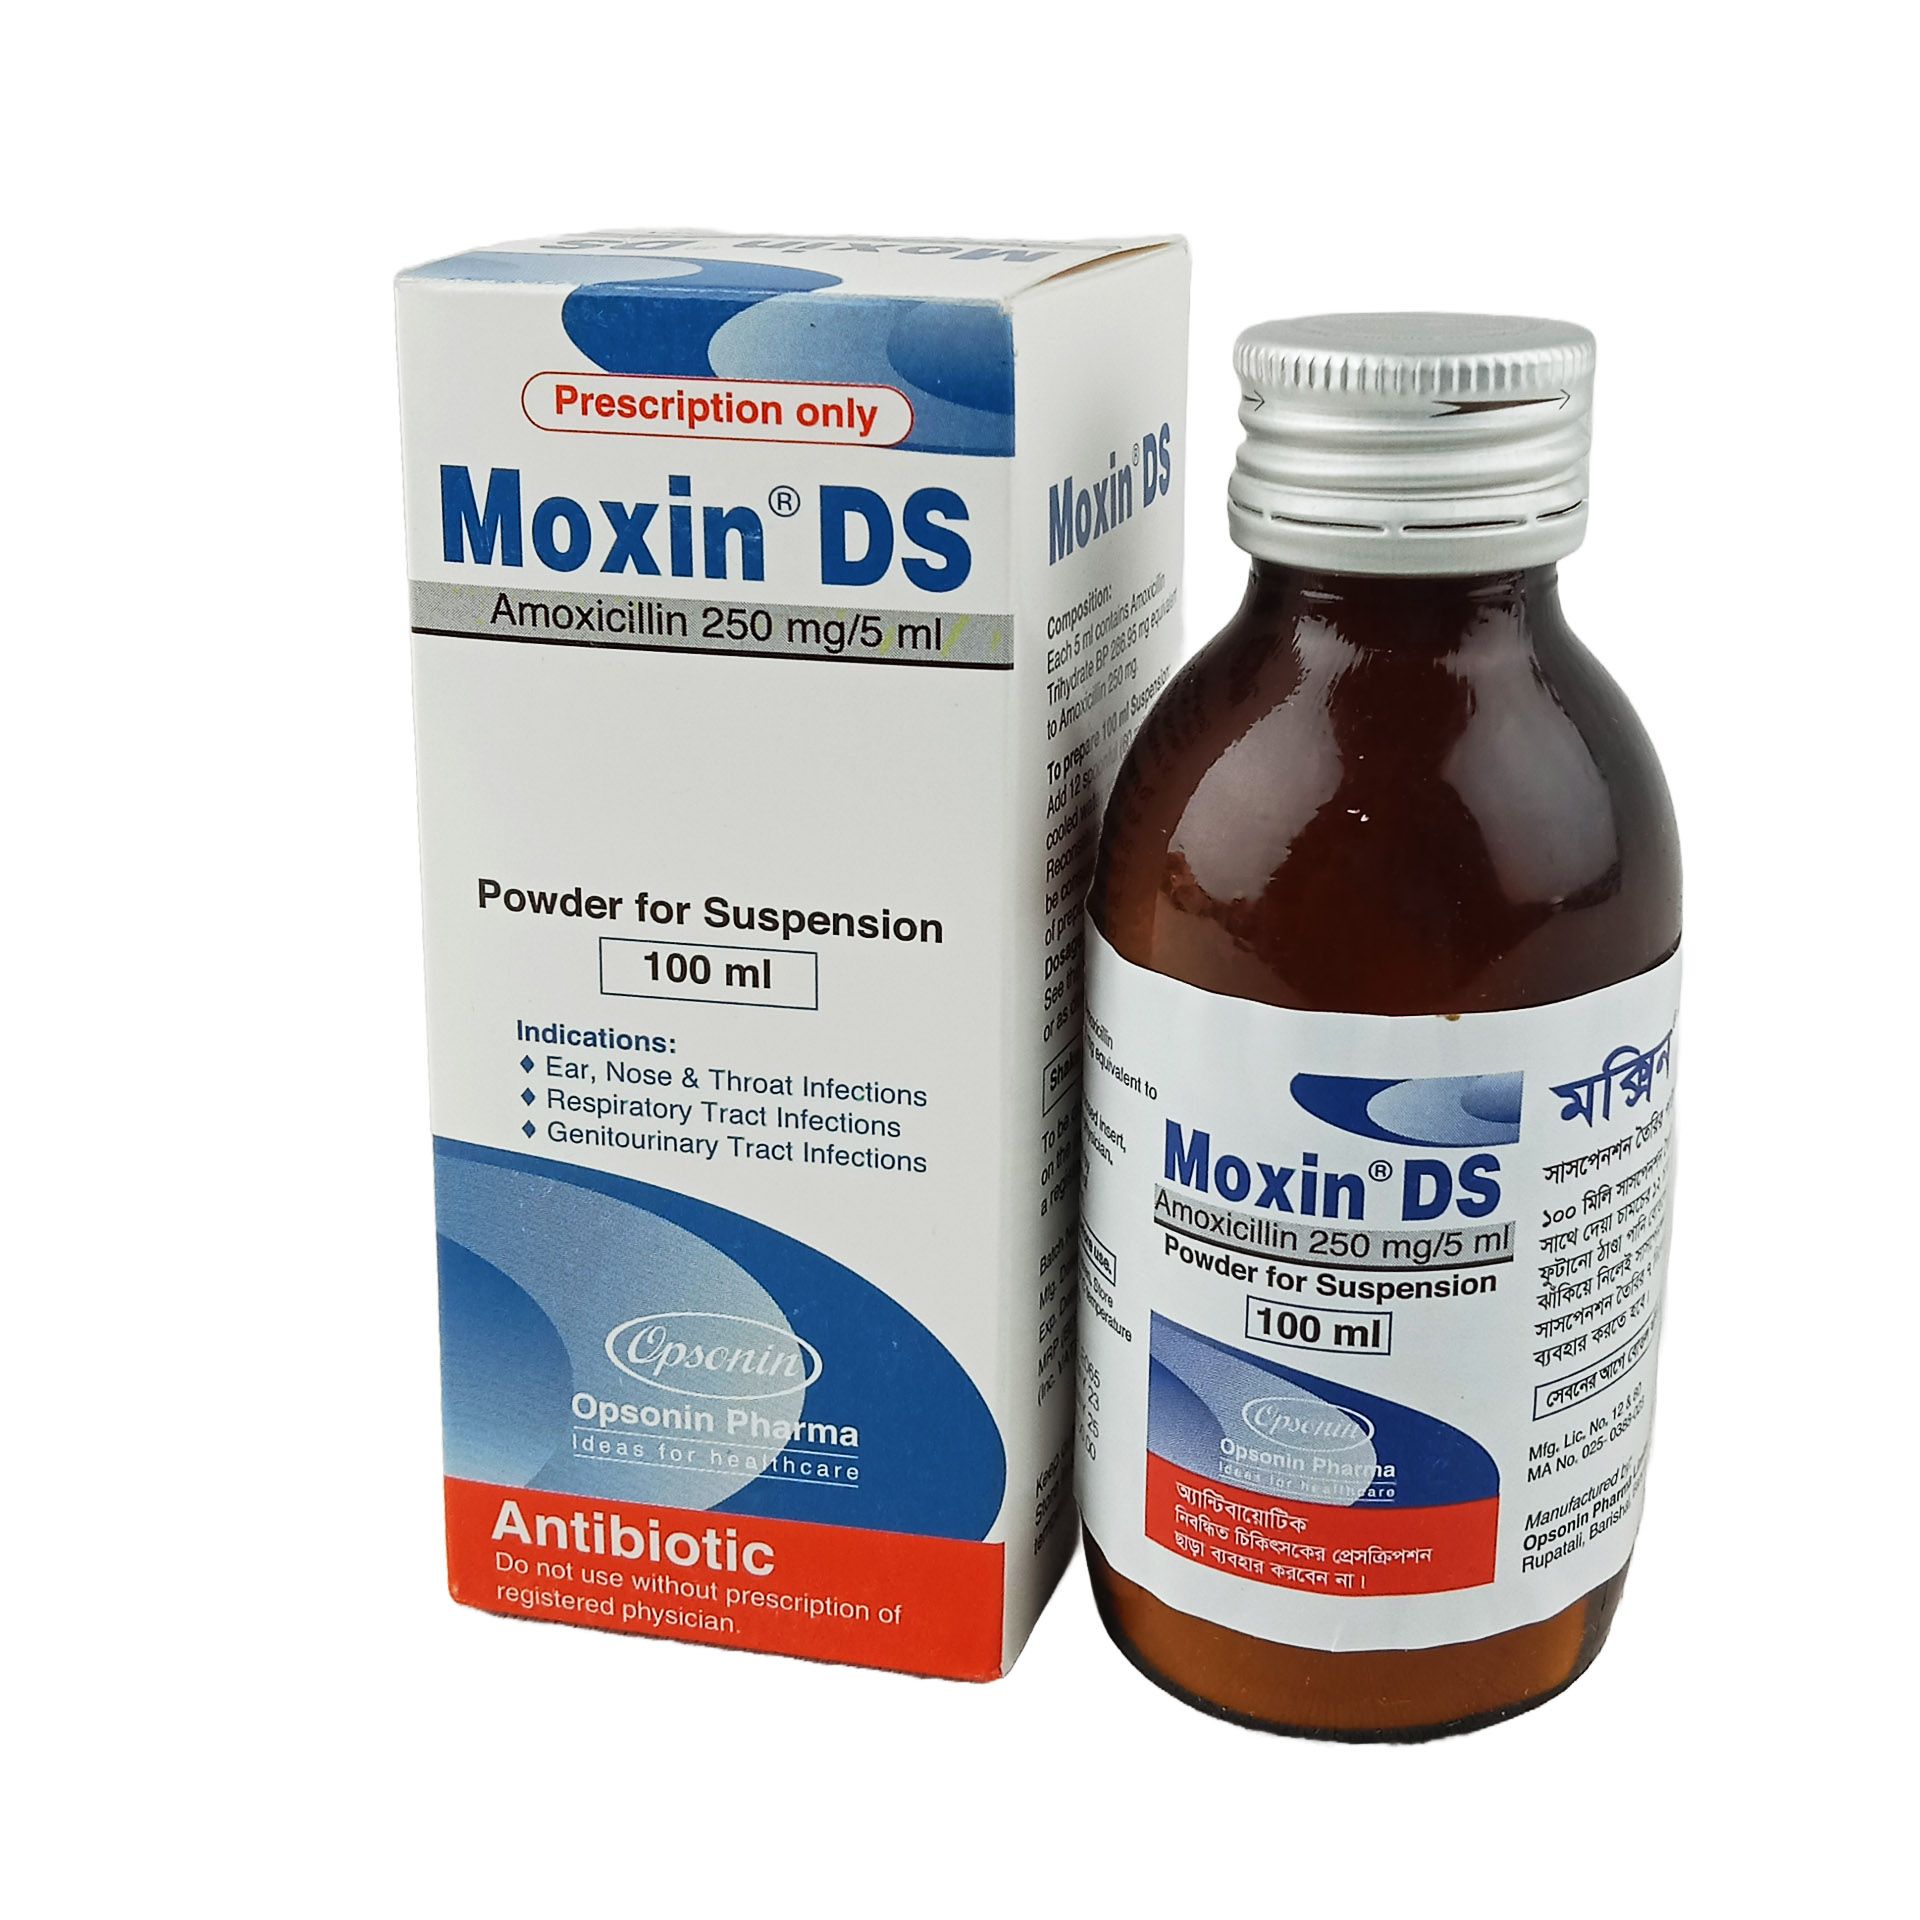 Moxin DS 250mg/5ml Powder for Suspension